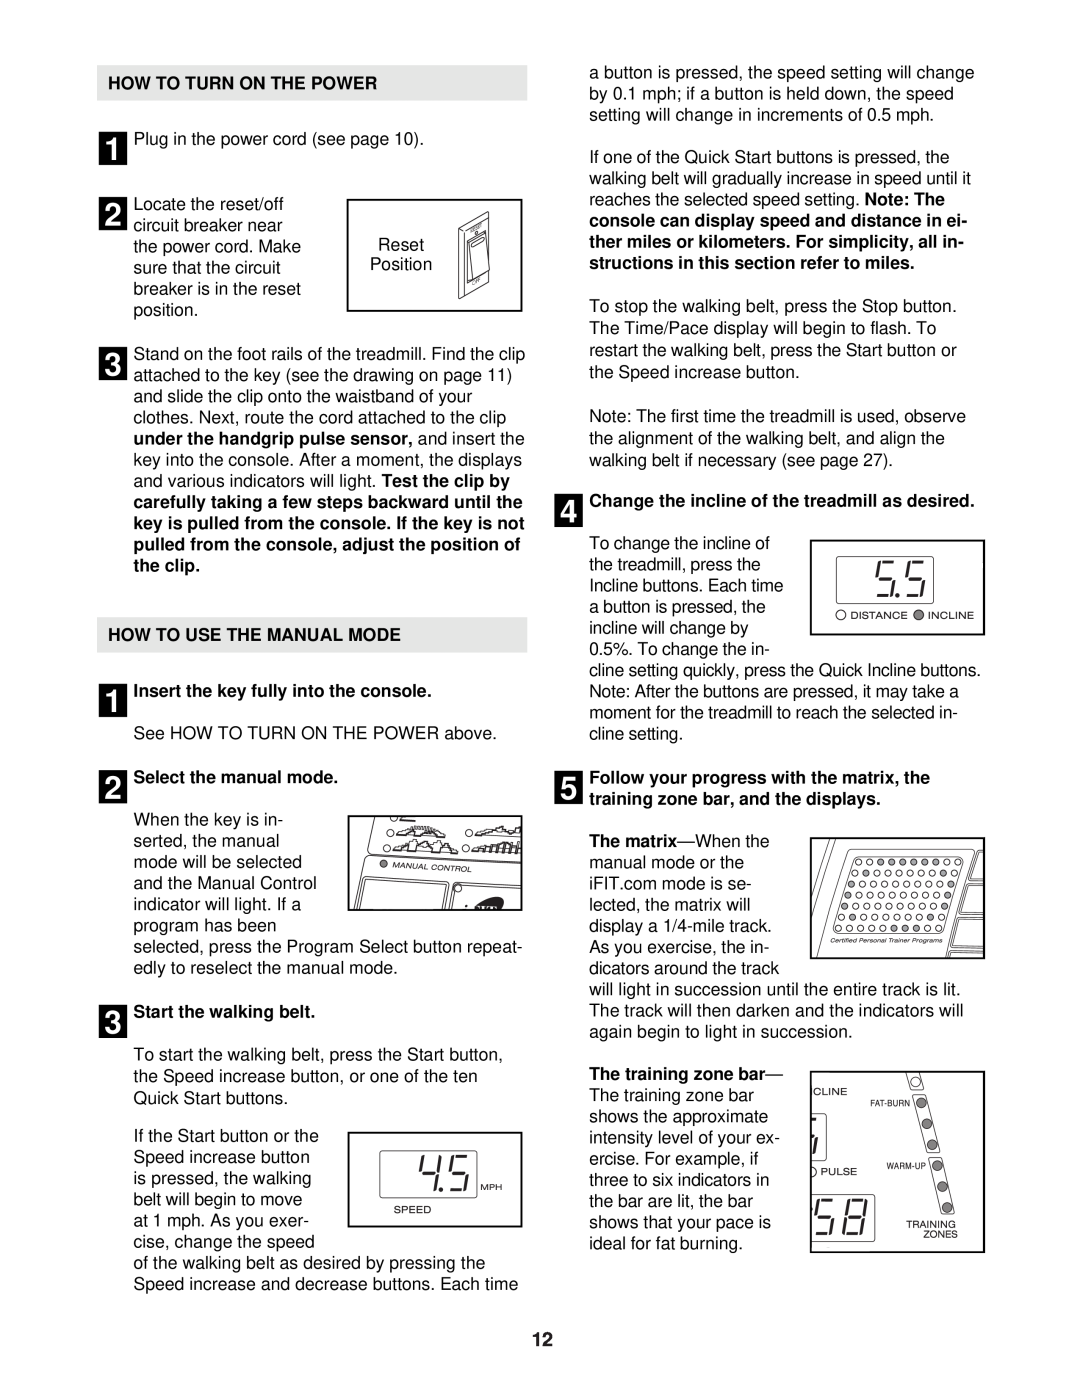 ProForm DTL72940 user manual How To Turn On The Power, HOW TO USE THE MANUAL MODE 1 Insert the key fully into the console 